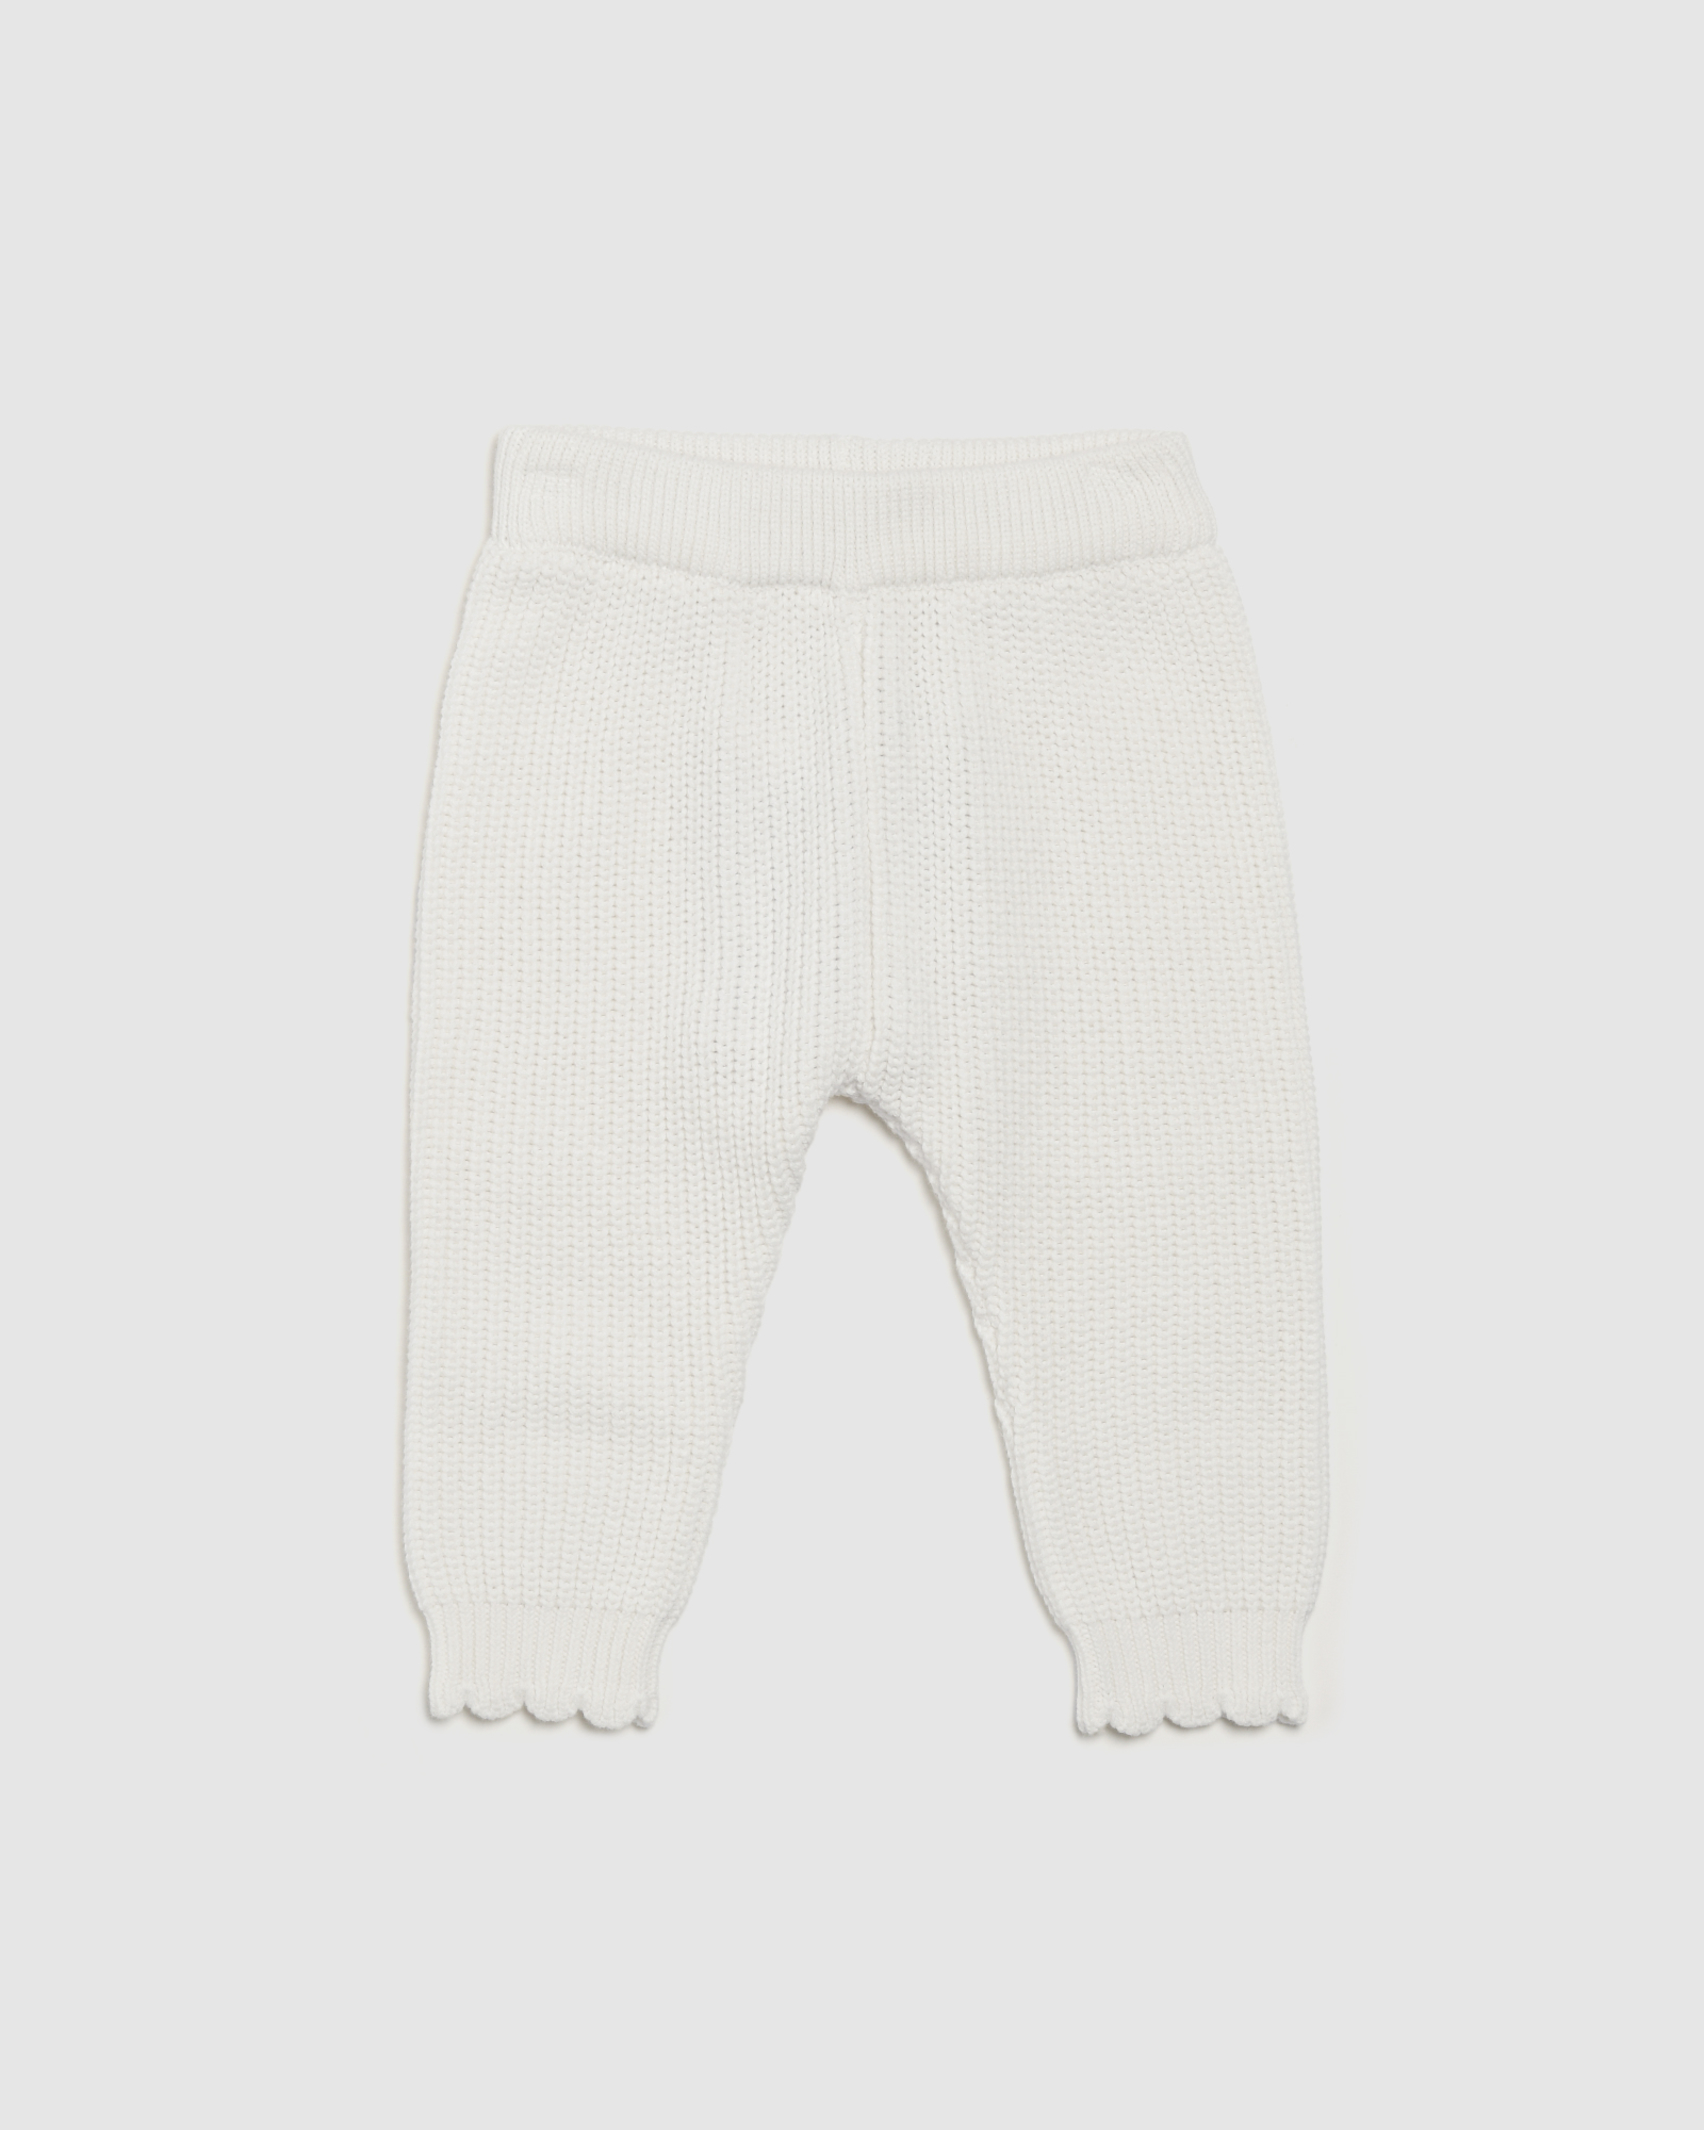 Sally Cotton Knit Baby Legging in IVORY